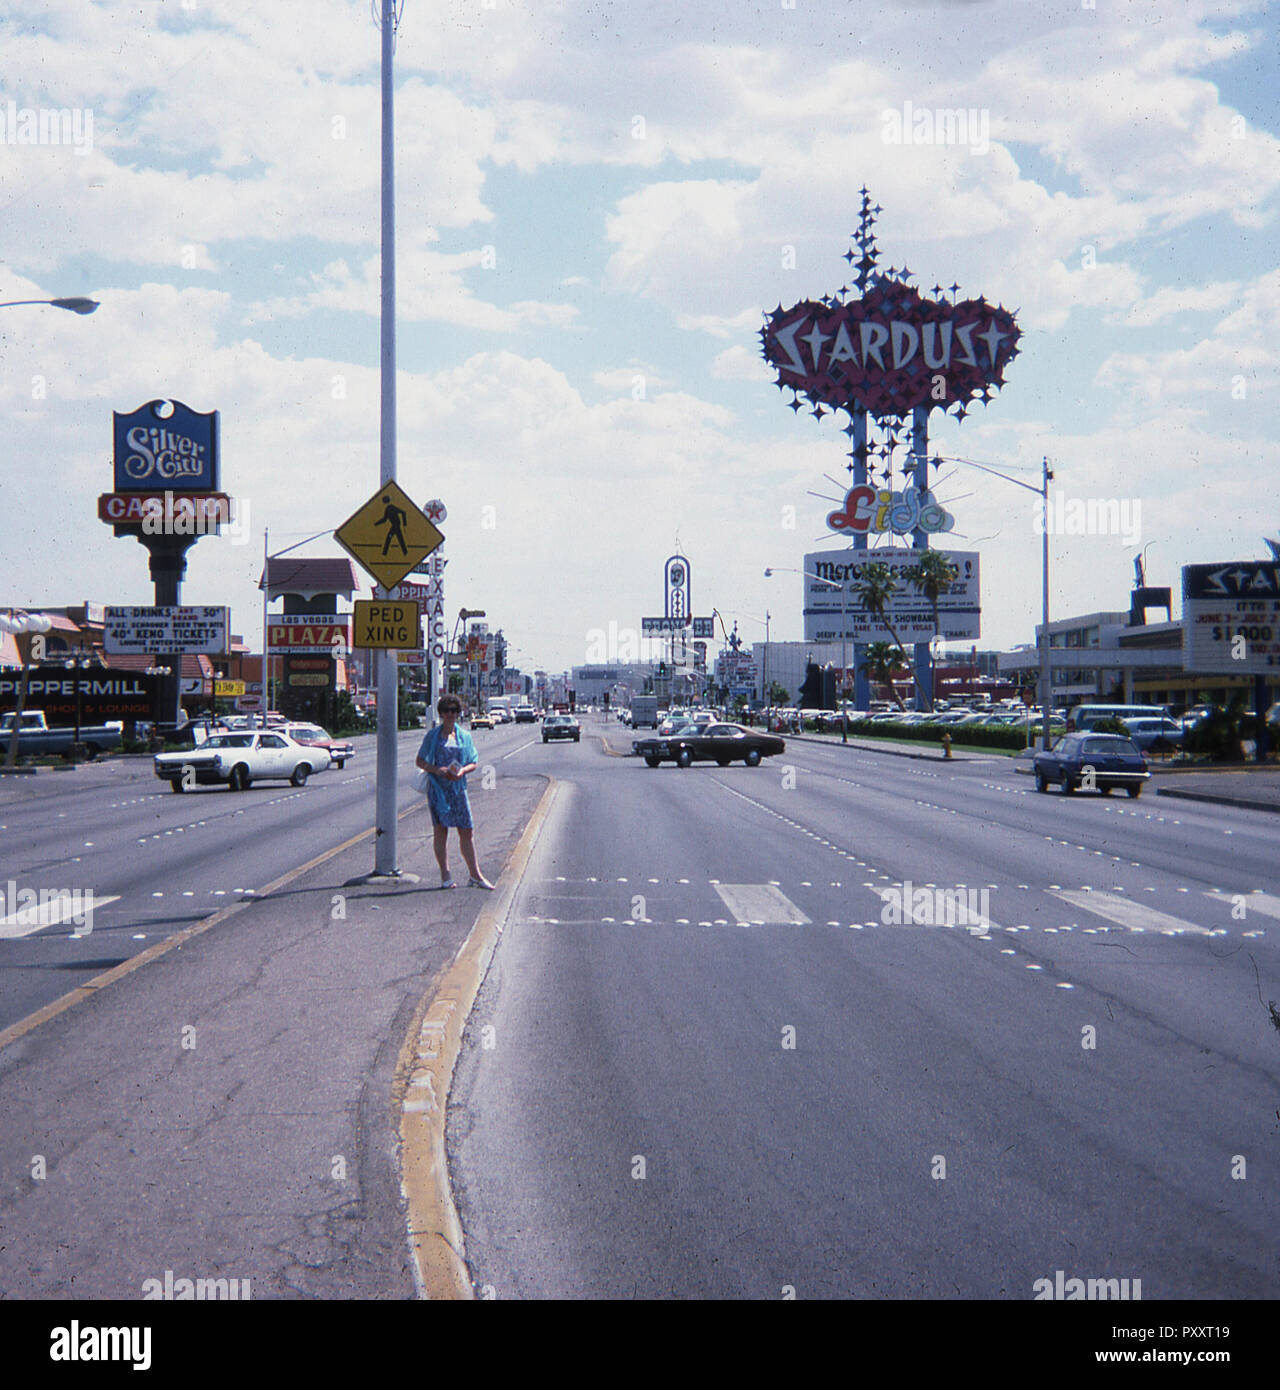 1975, historical, daytime and a lady stands in the middle of 'the strip', a central boulevard in the casino town of Las Vegas, Nevada, USA. A roadside sign (1967) for the 'Stardust', the famous resort hotel and casino which opened in 1958, can be seen in the picture and was made up of a scatter of neon star shapes which lit up at night. Stock Photo